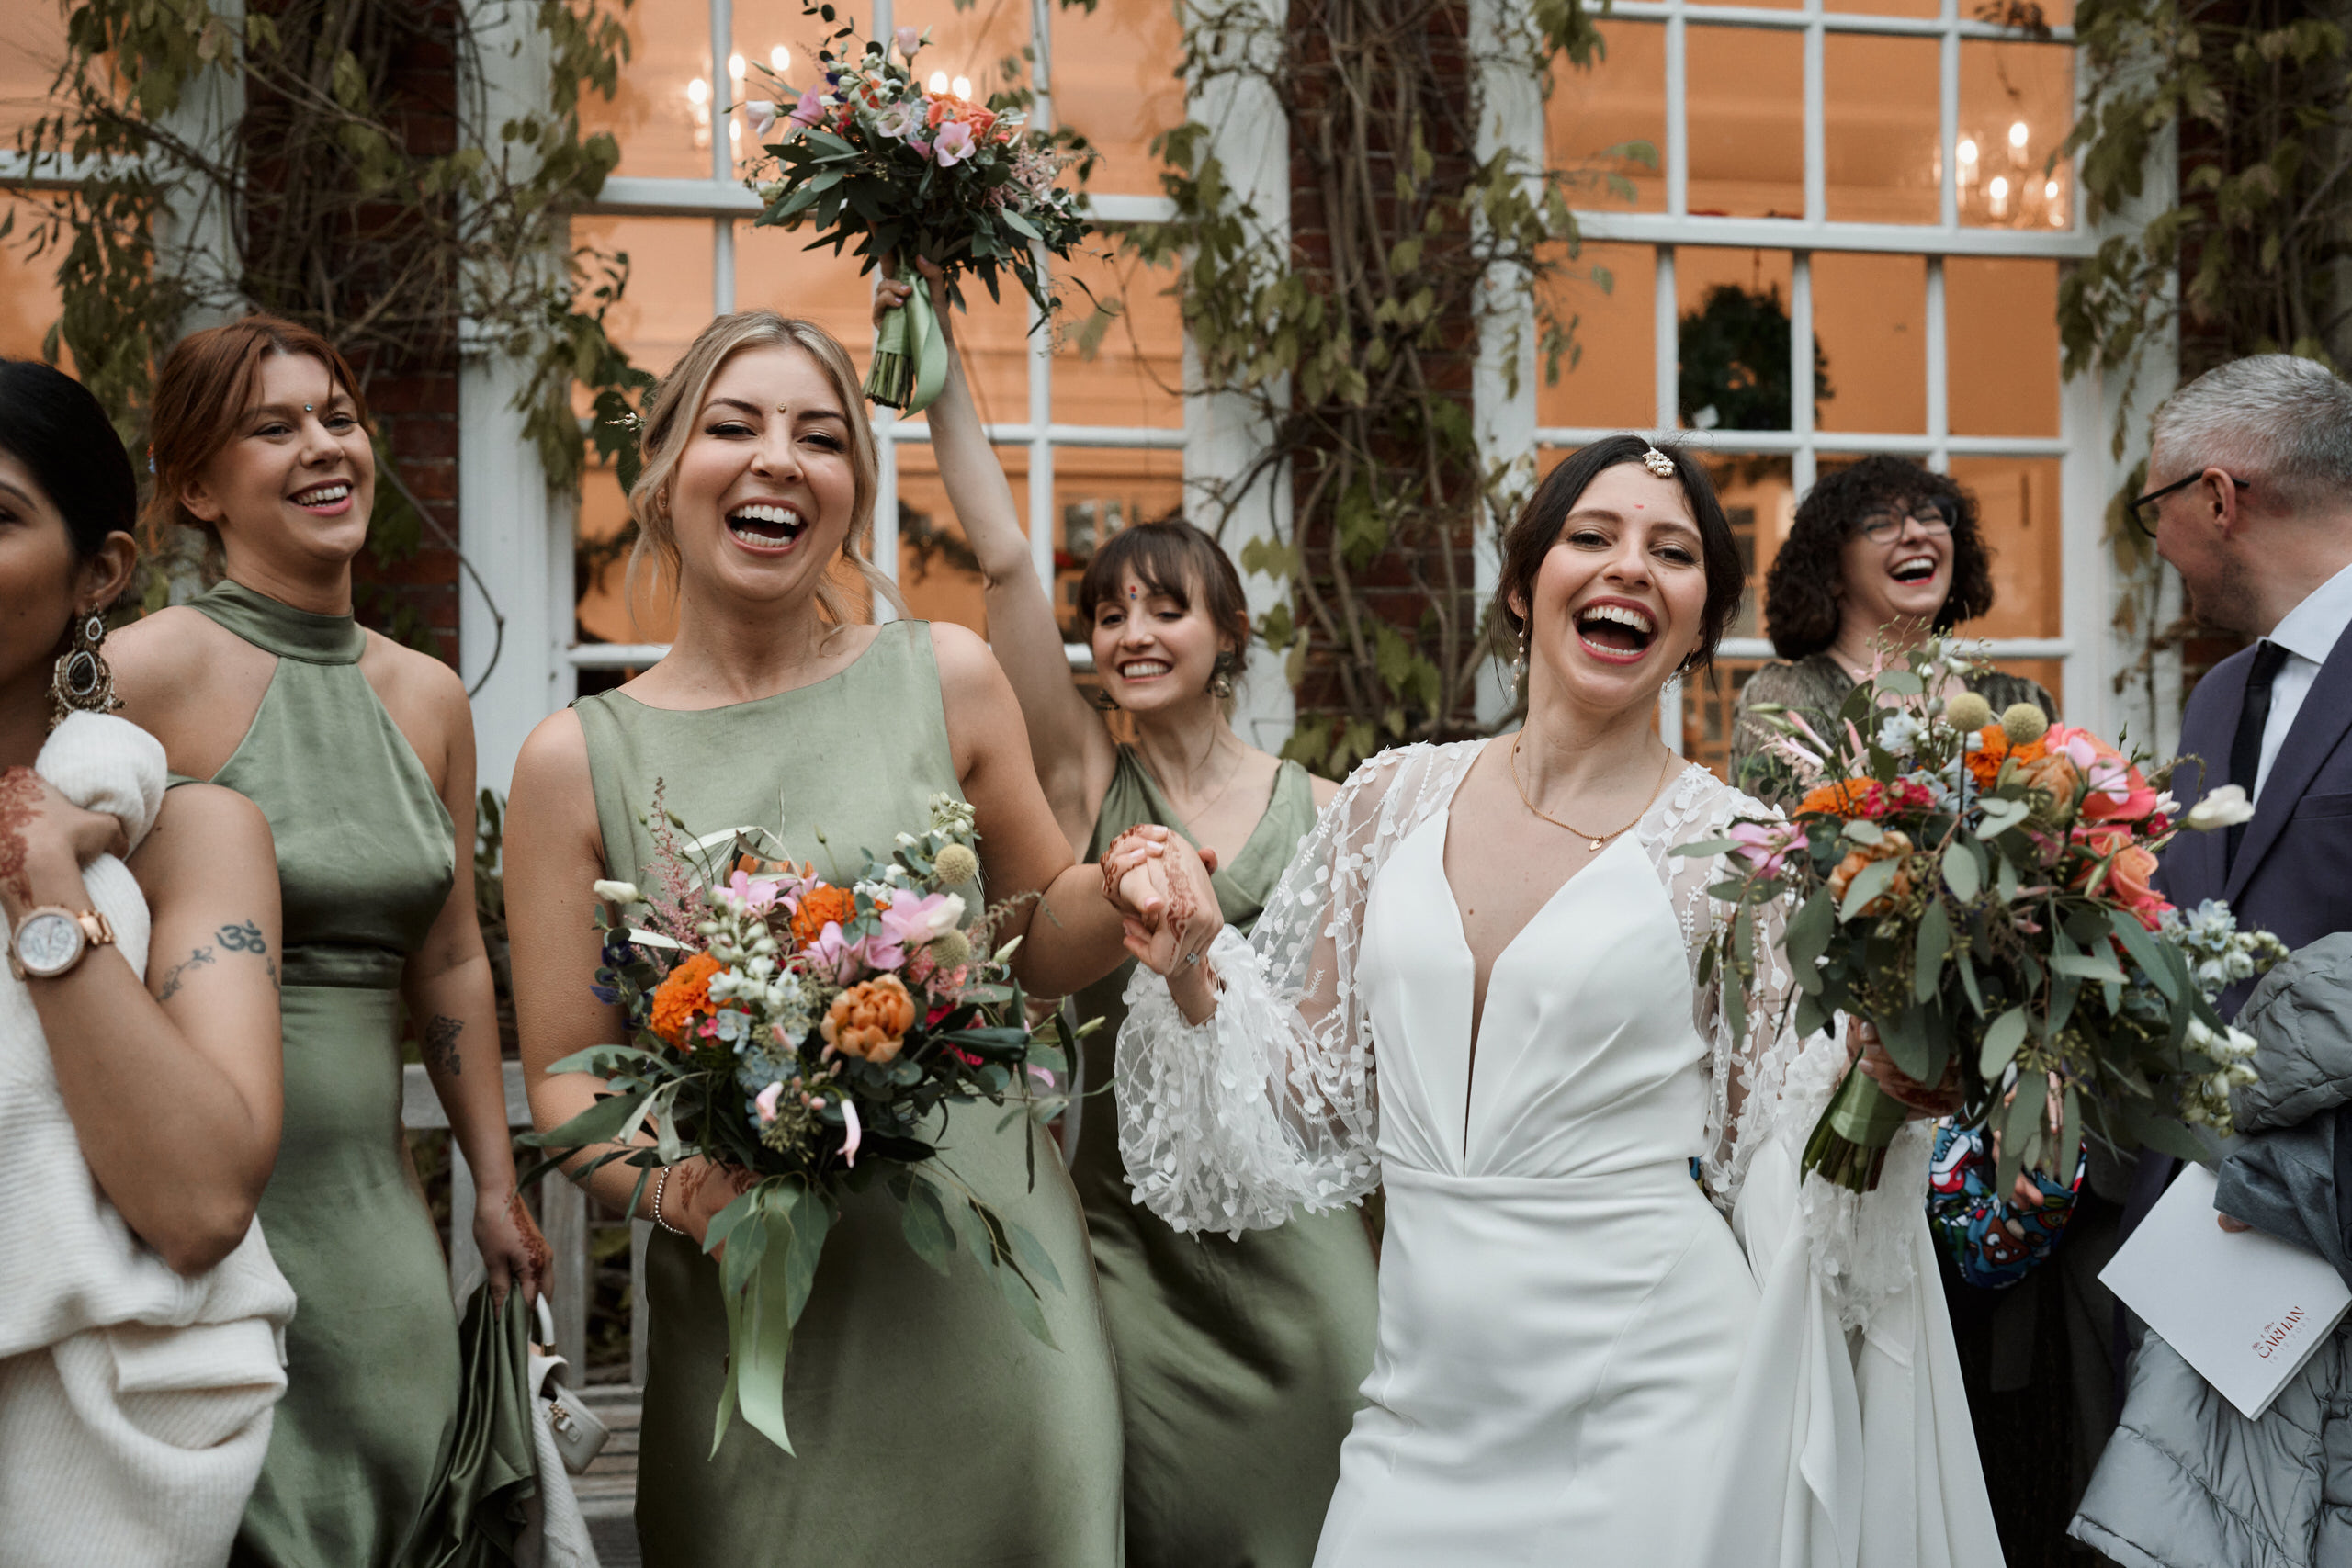 A bunch of bridesmaids are giggling and holding flower arrangements.